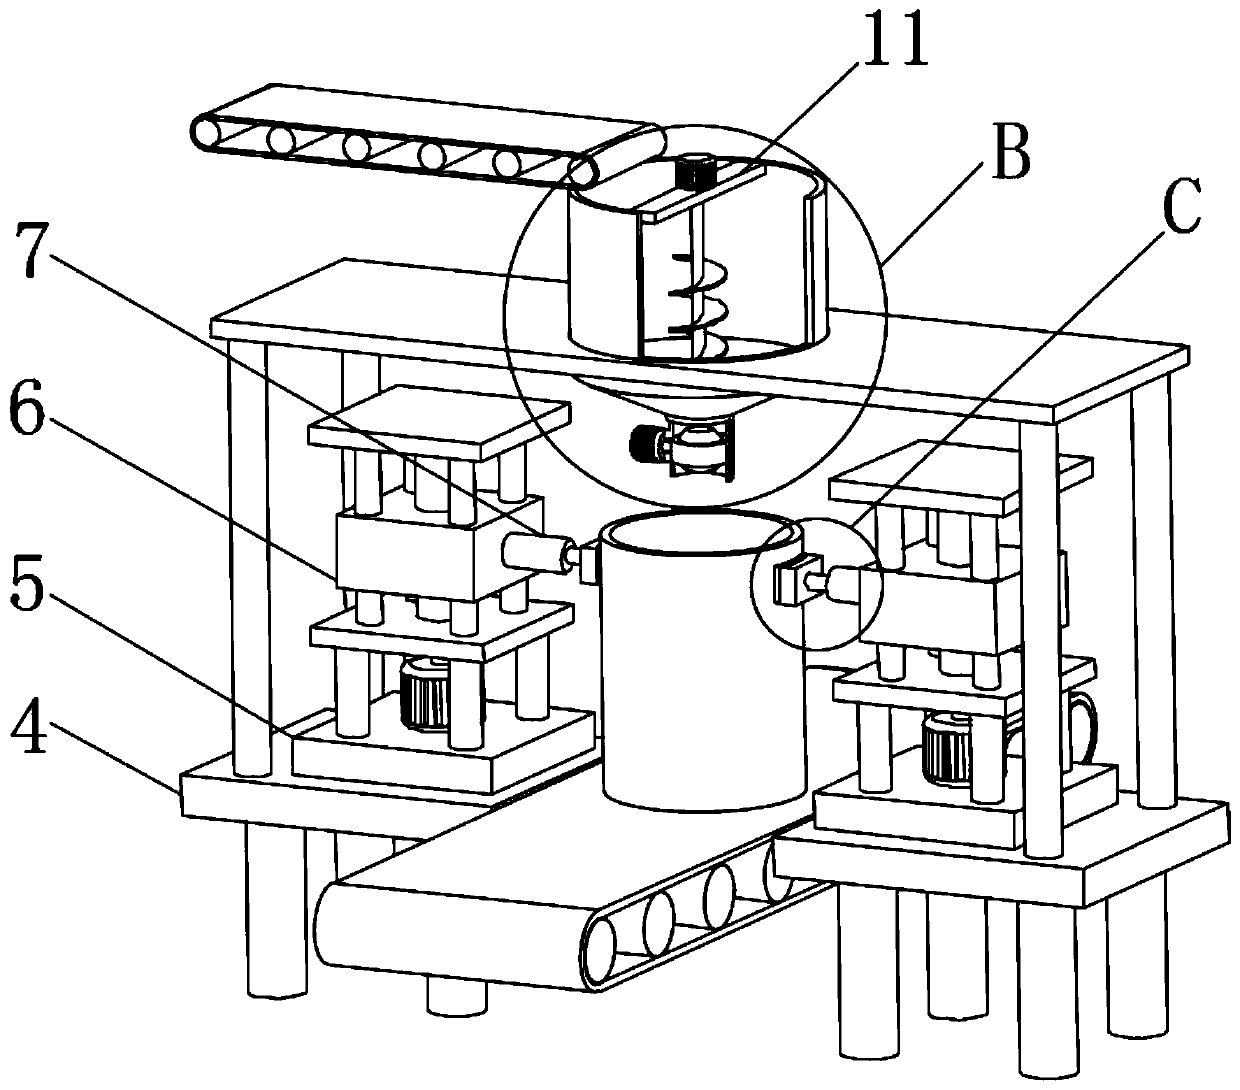 Filling device for radioactive waste treatment